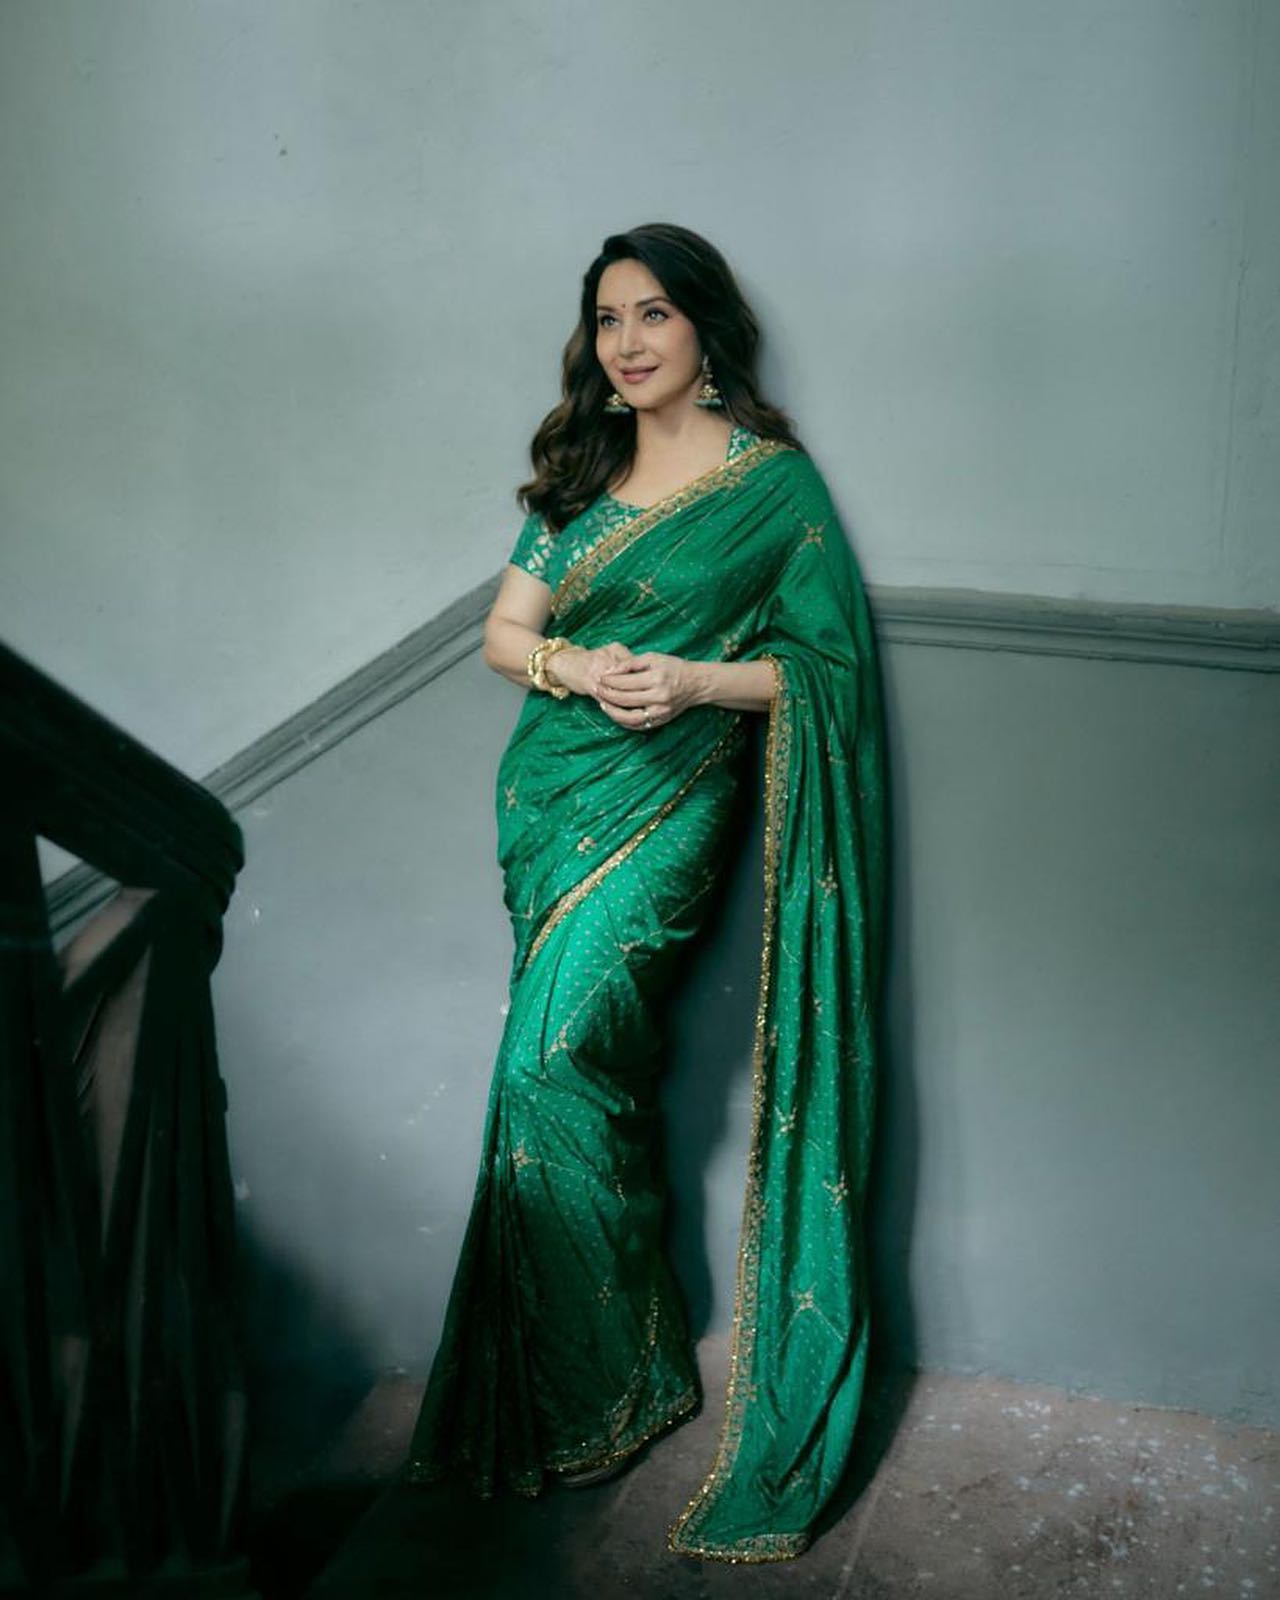 Madhuri Dixit Slays The Ethnic Green Bandhej Saree Like A Queen | IWMBuzz